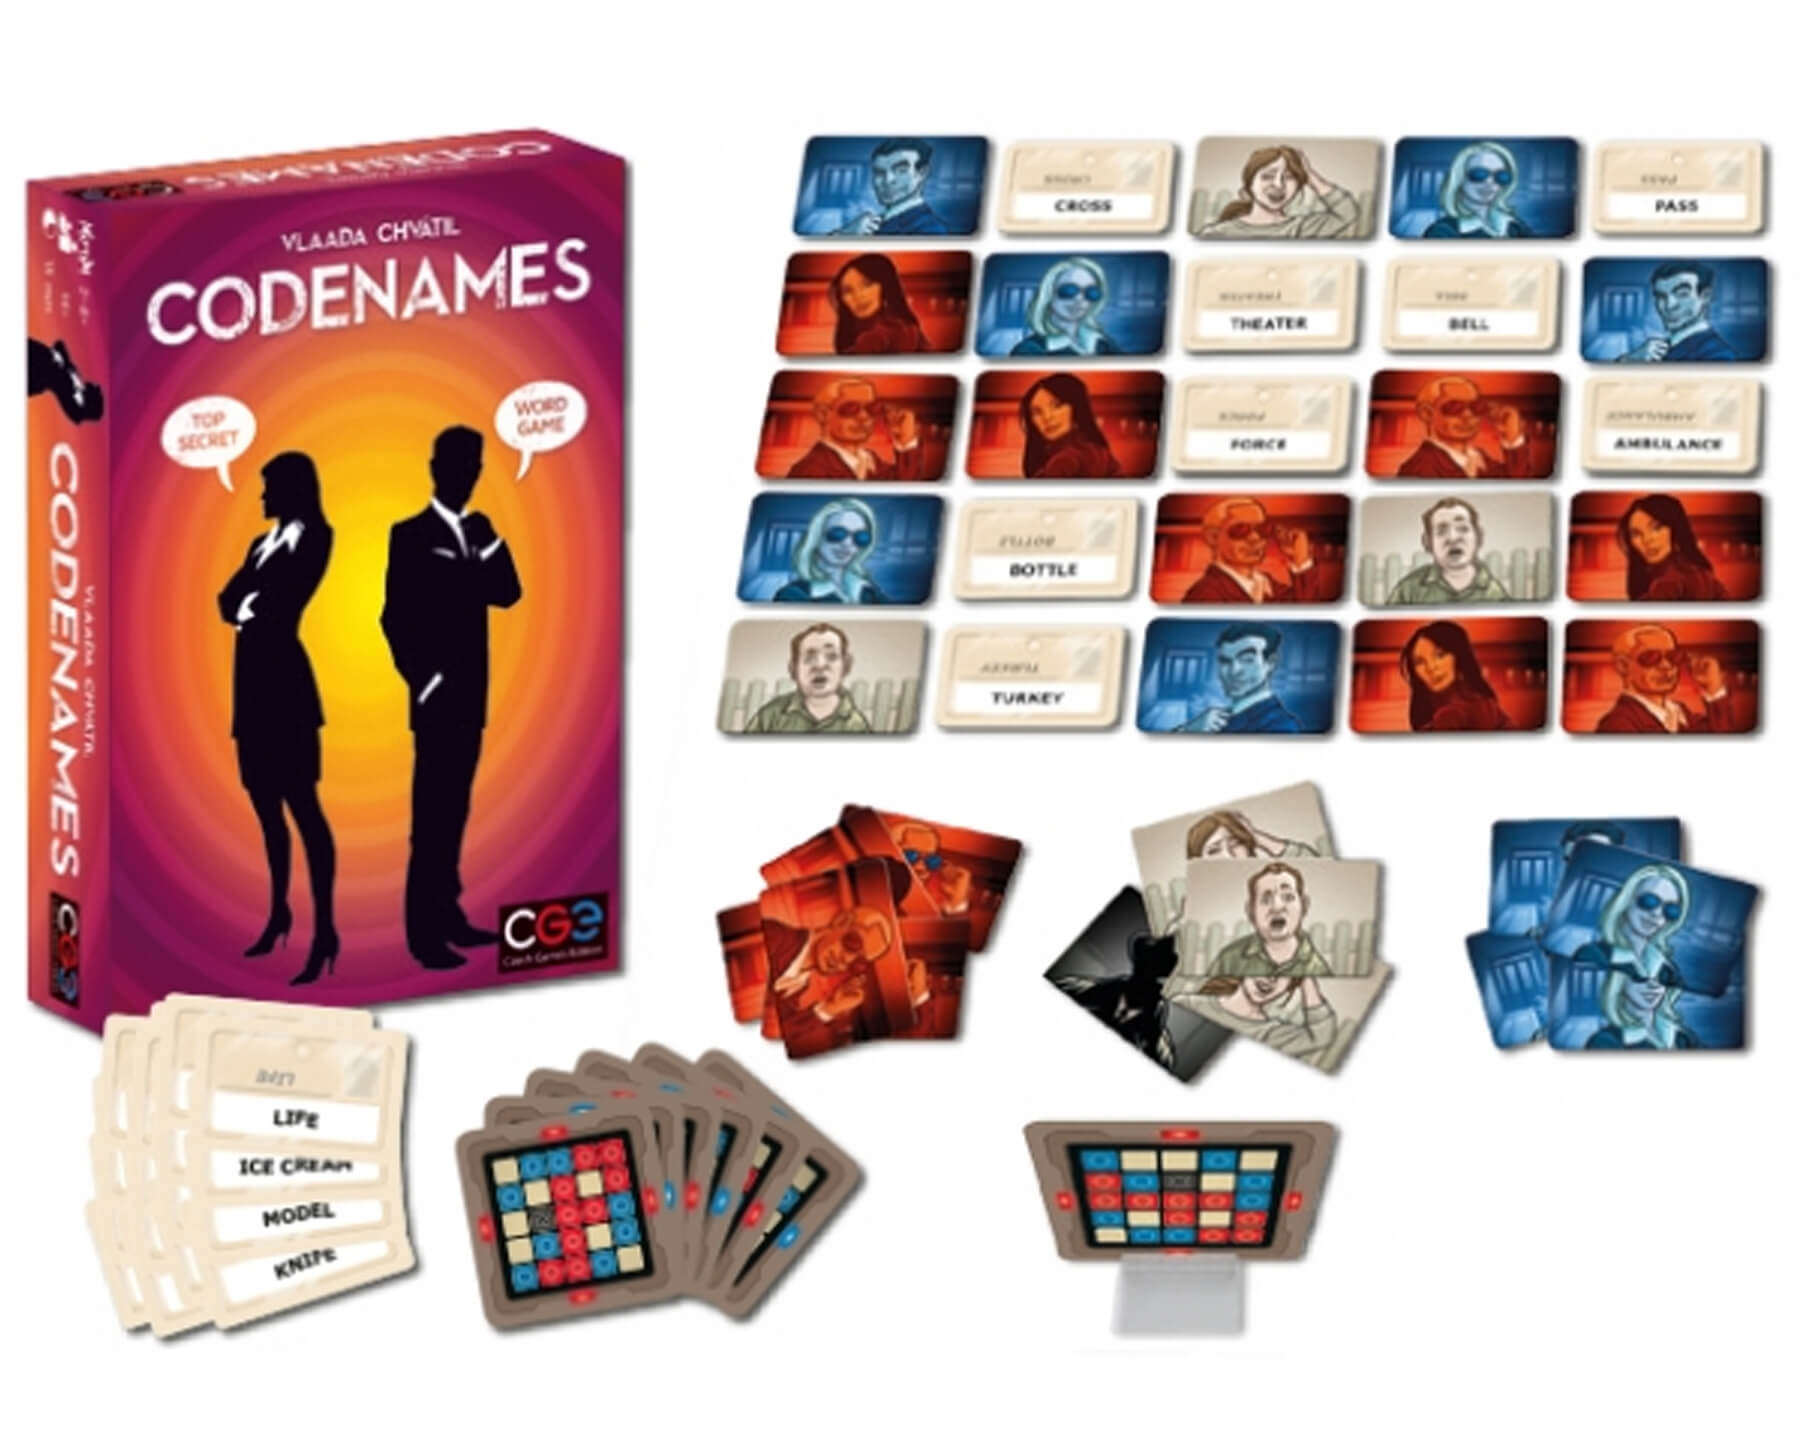 The art and game pieces for the tabletop game Codenames.